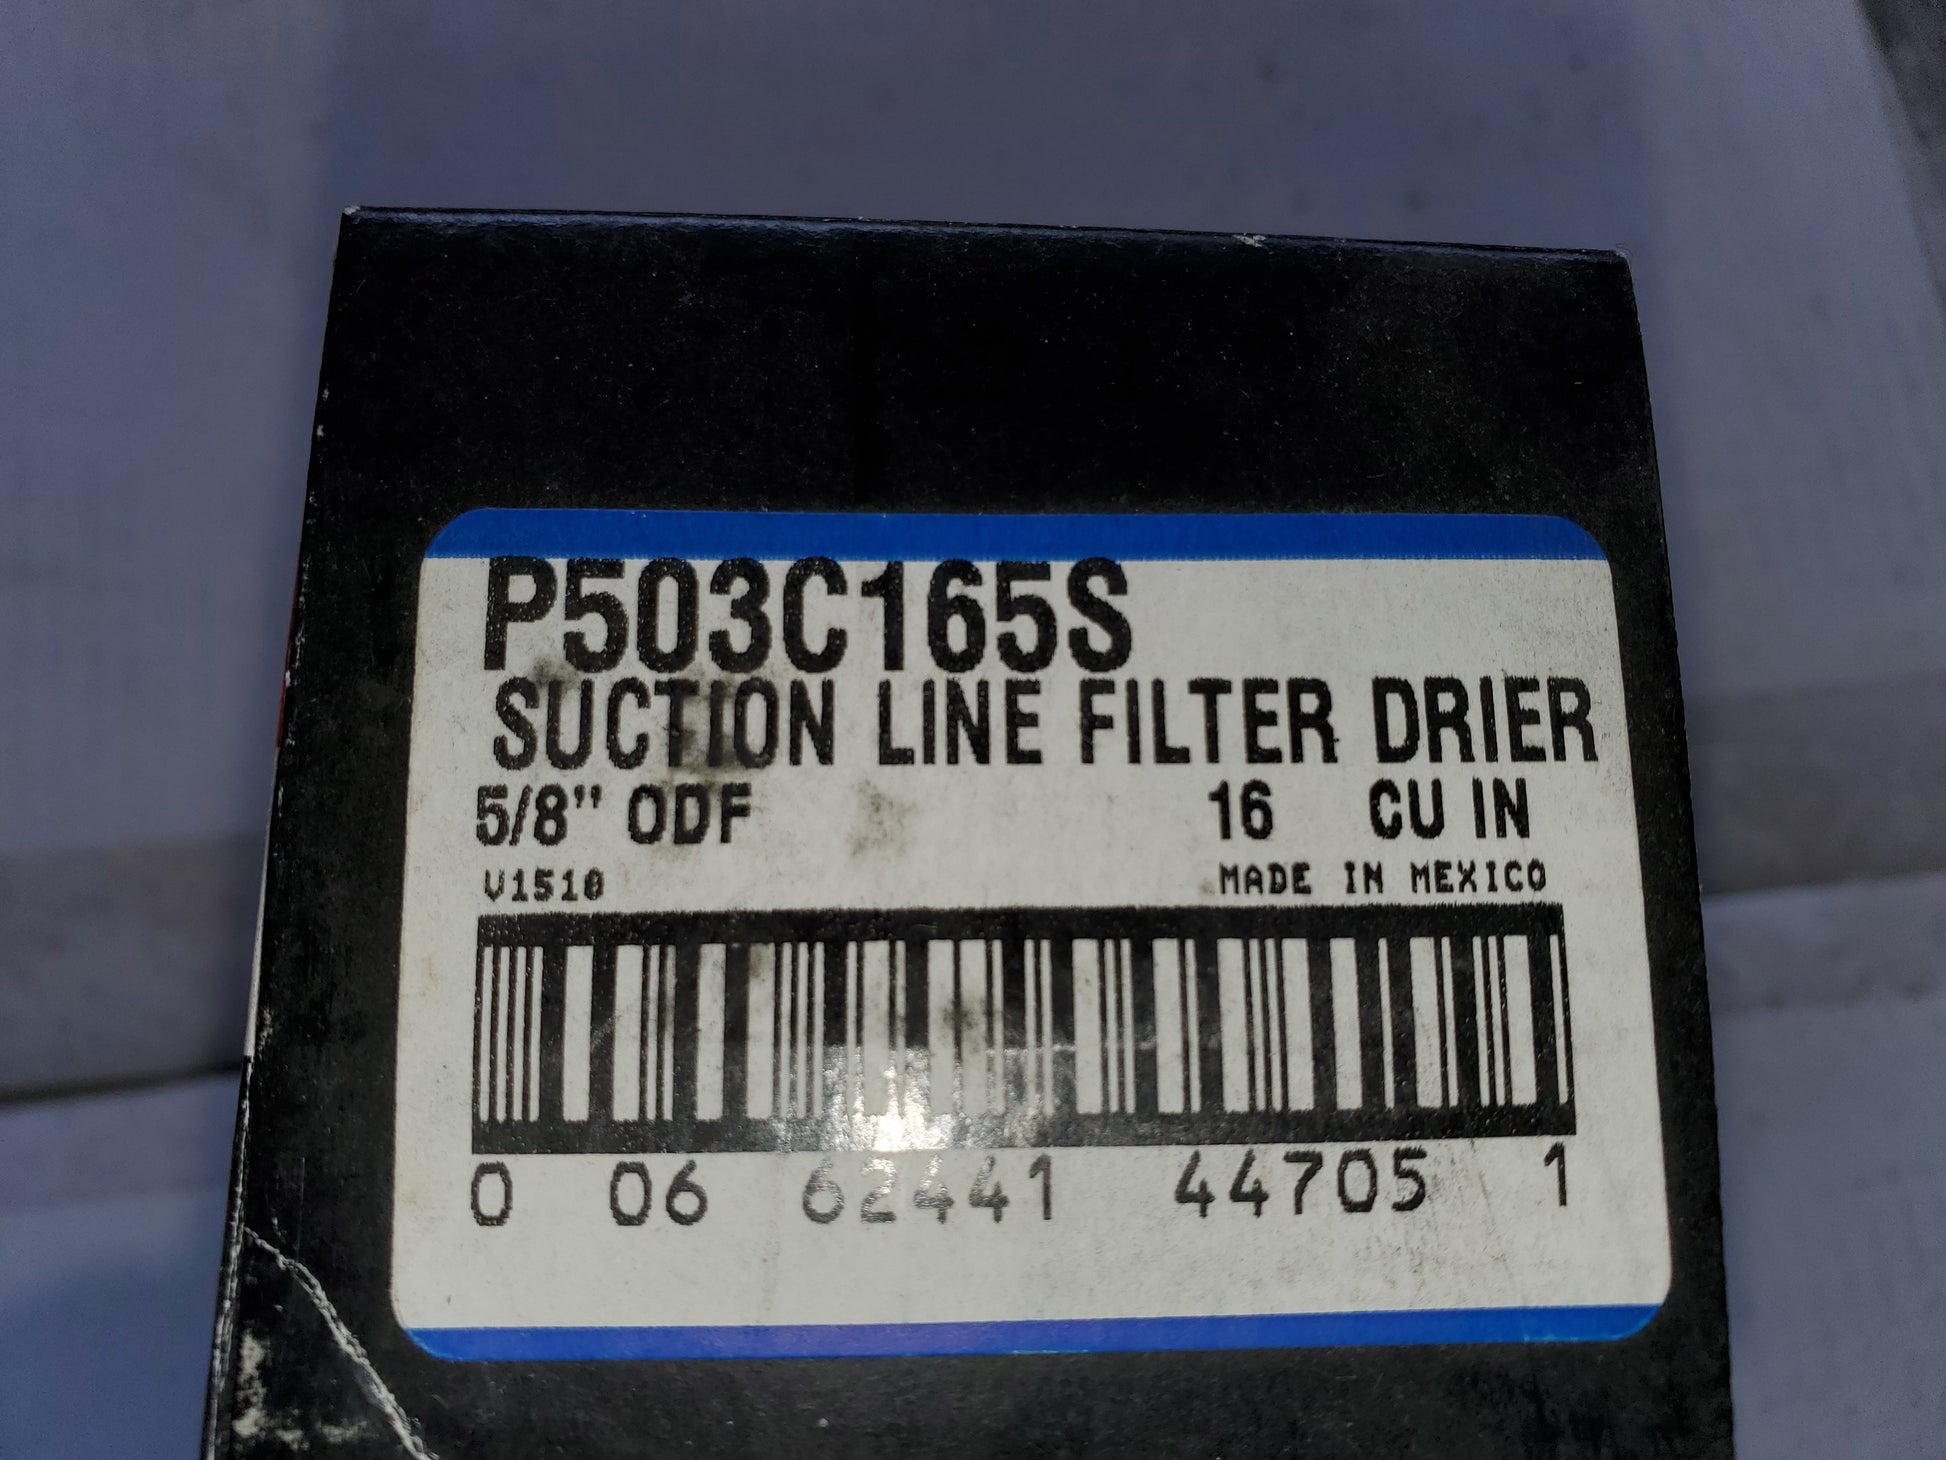 16 CUBIC INCH 5/8"  SWEAT SUCTION LINE FILTER DRIER